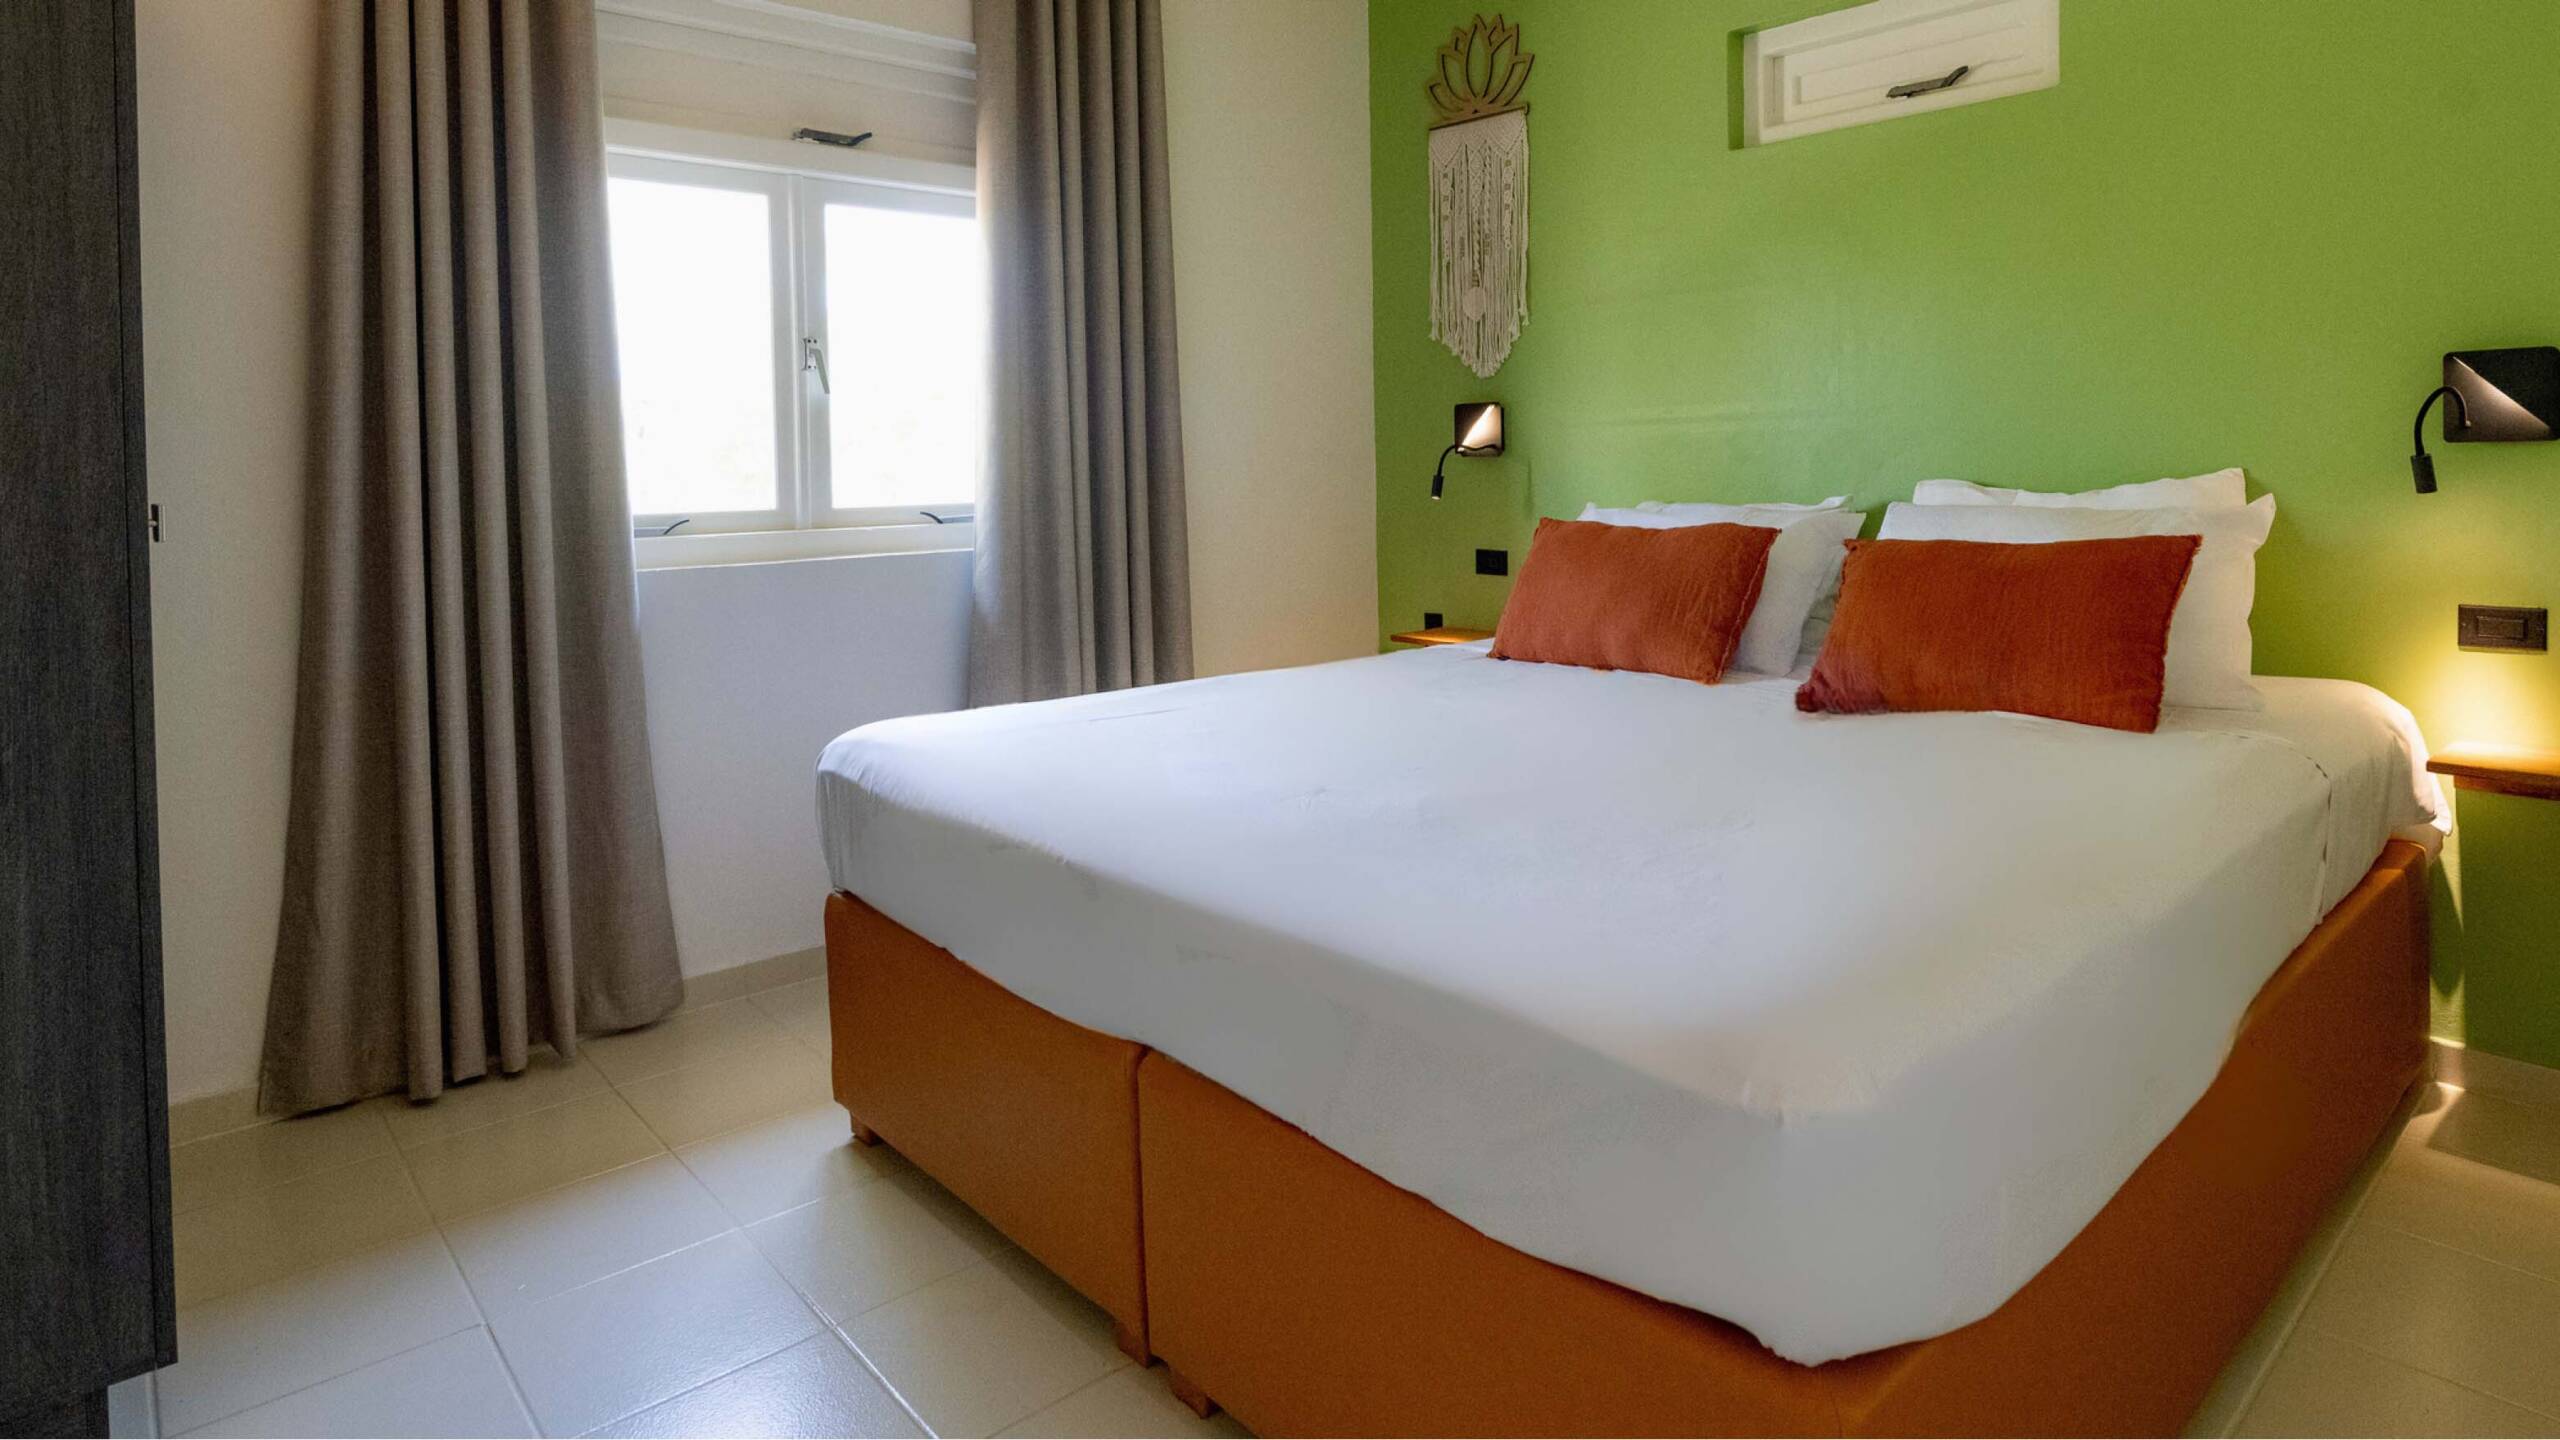 Dream of the Green Flamingo | Curacao Holiday Park - bedroom queen size bed